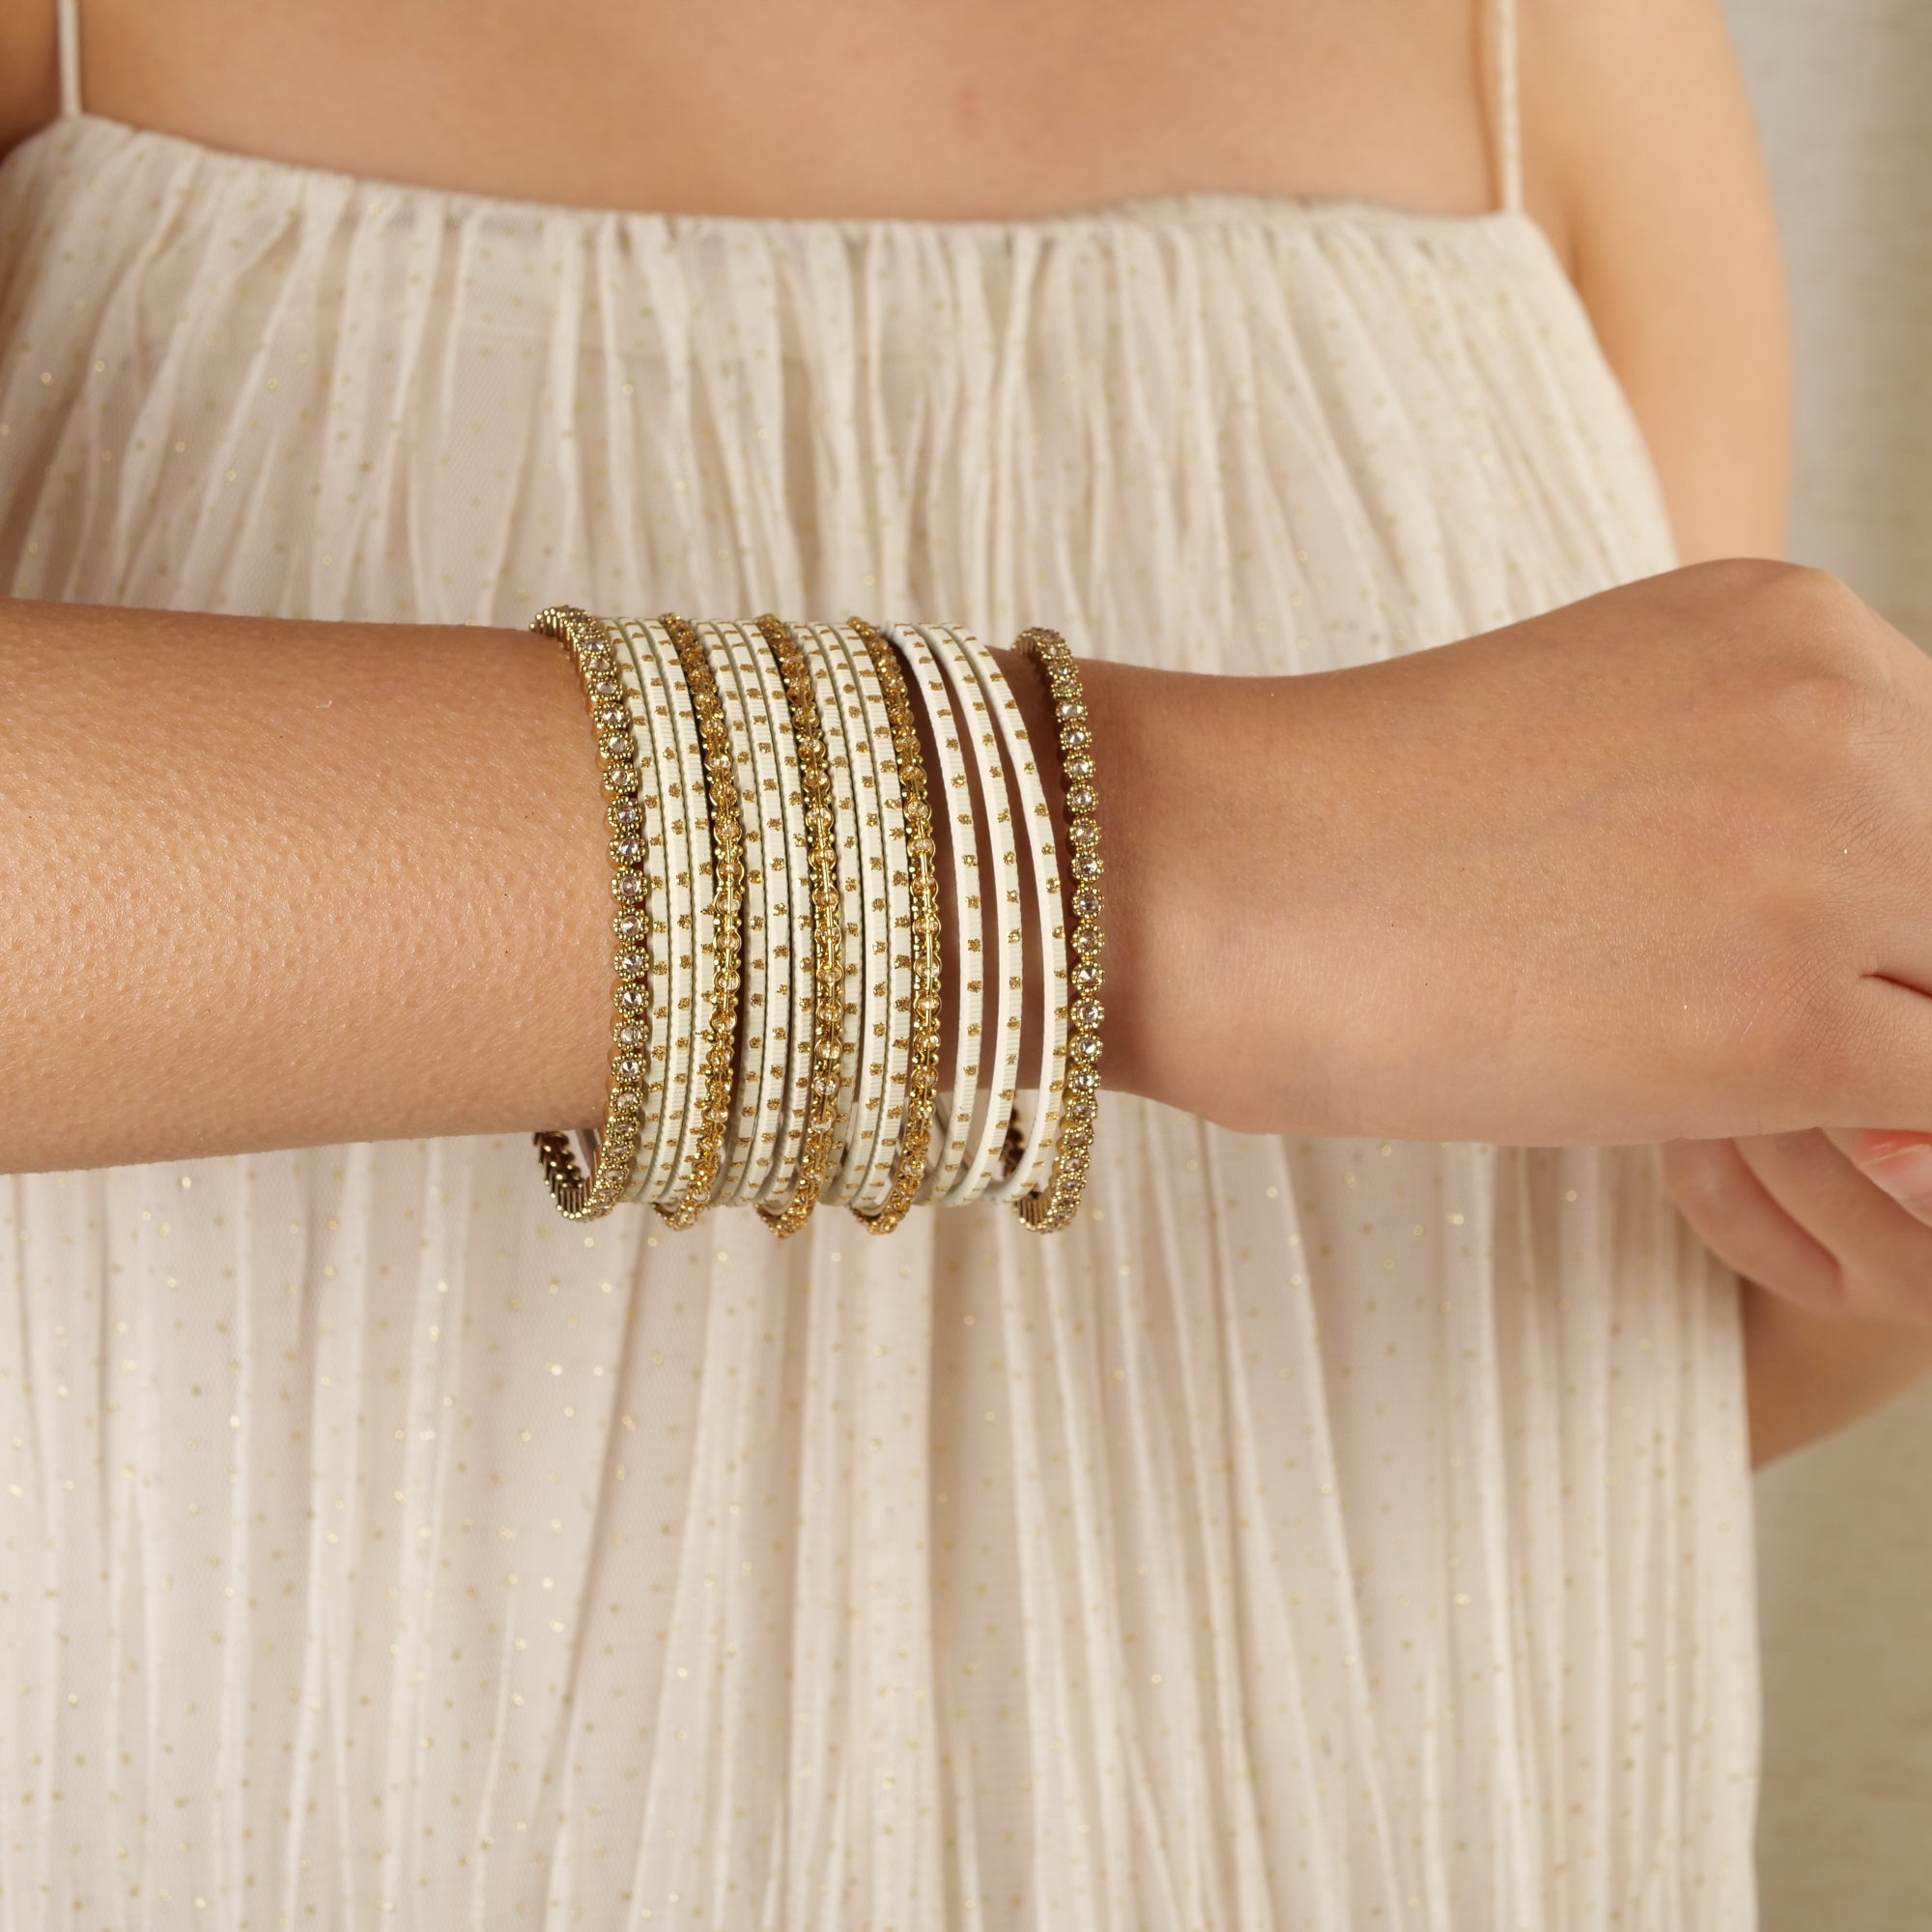 Timeless Antique and White Bangle Set